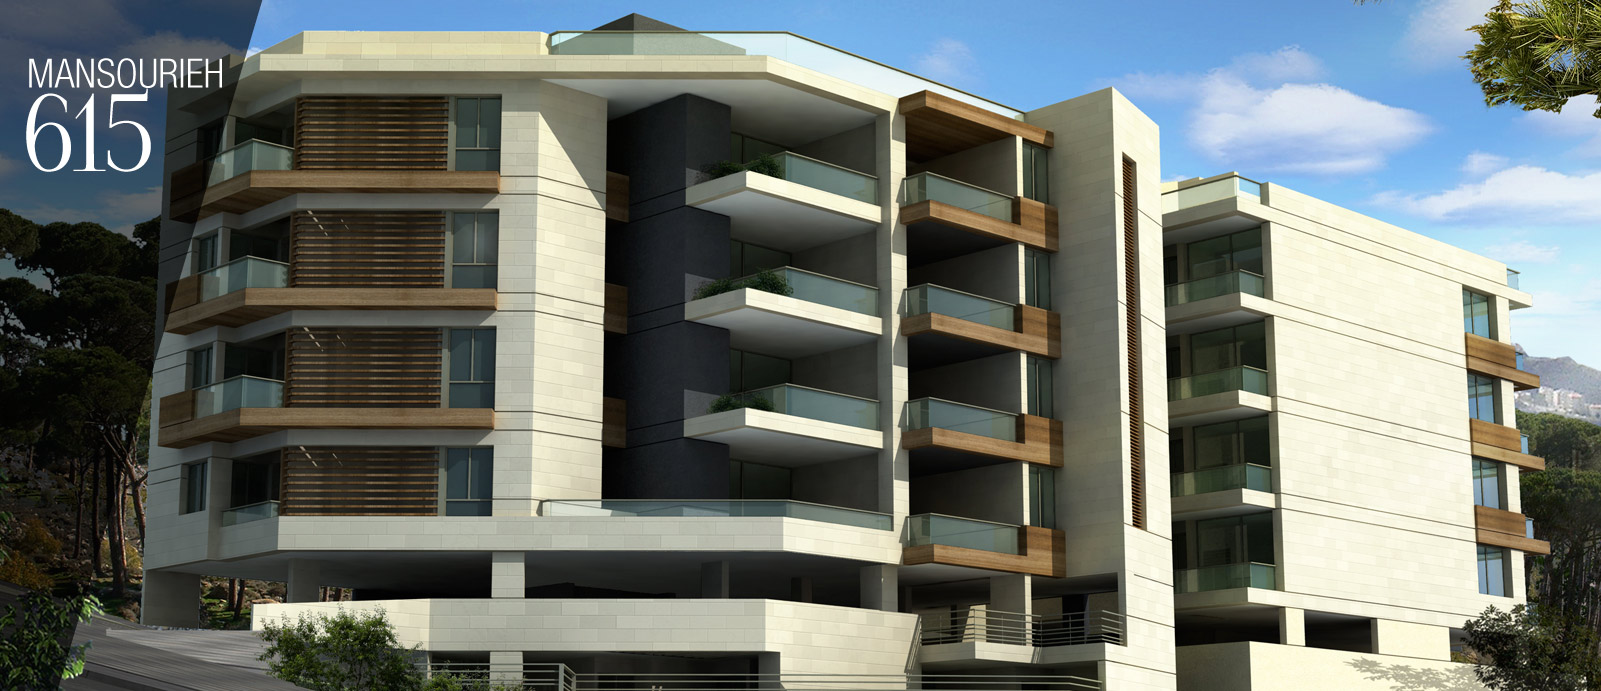 Apartments For Sale In Mansourieh